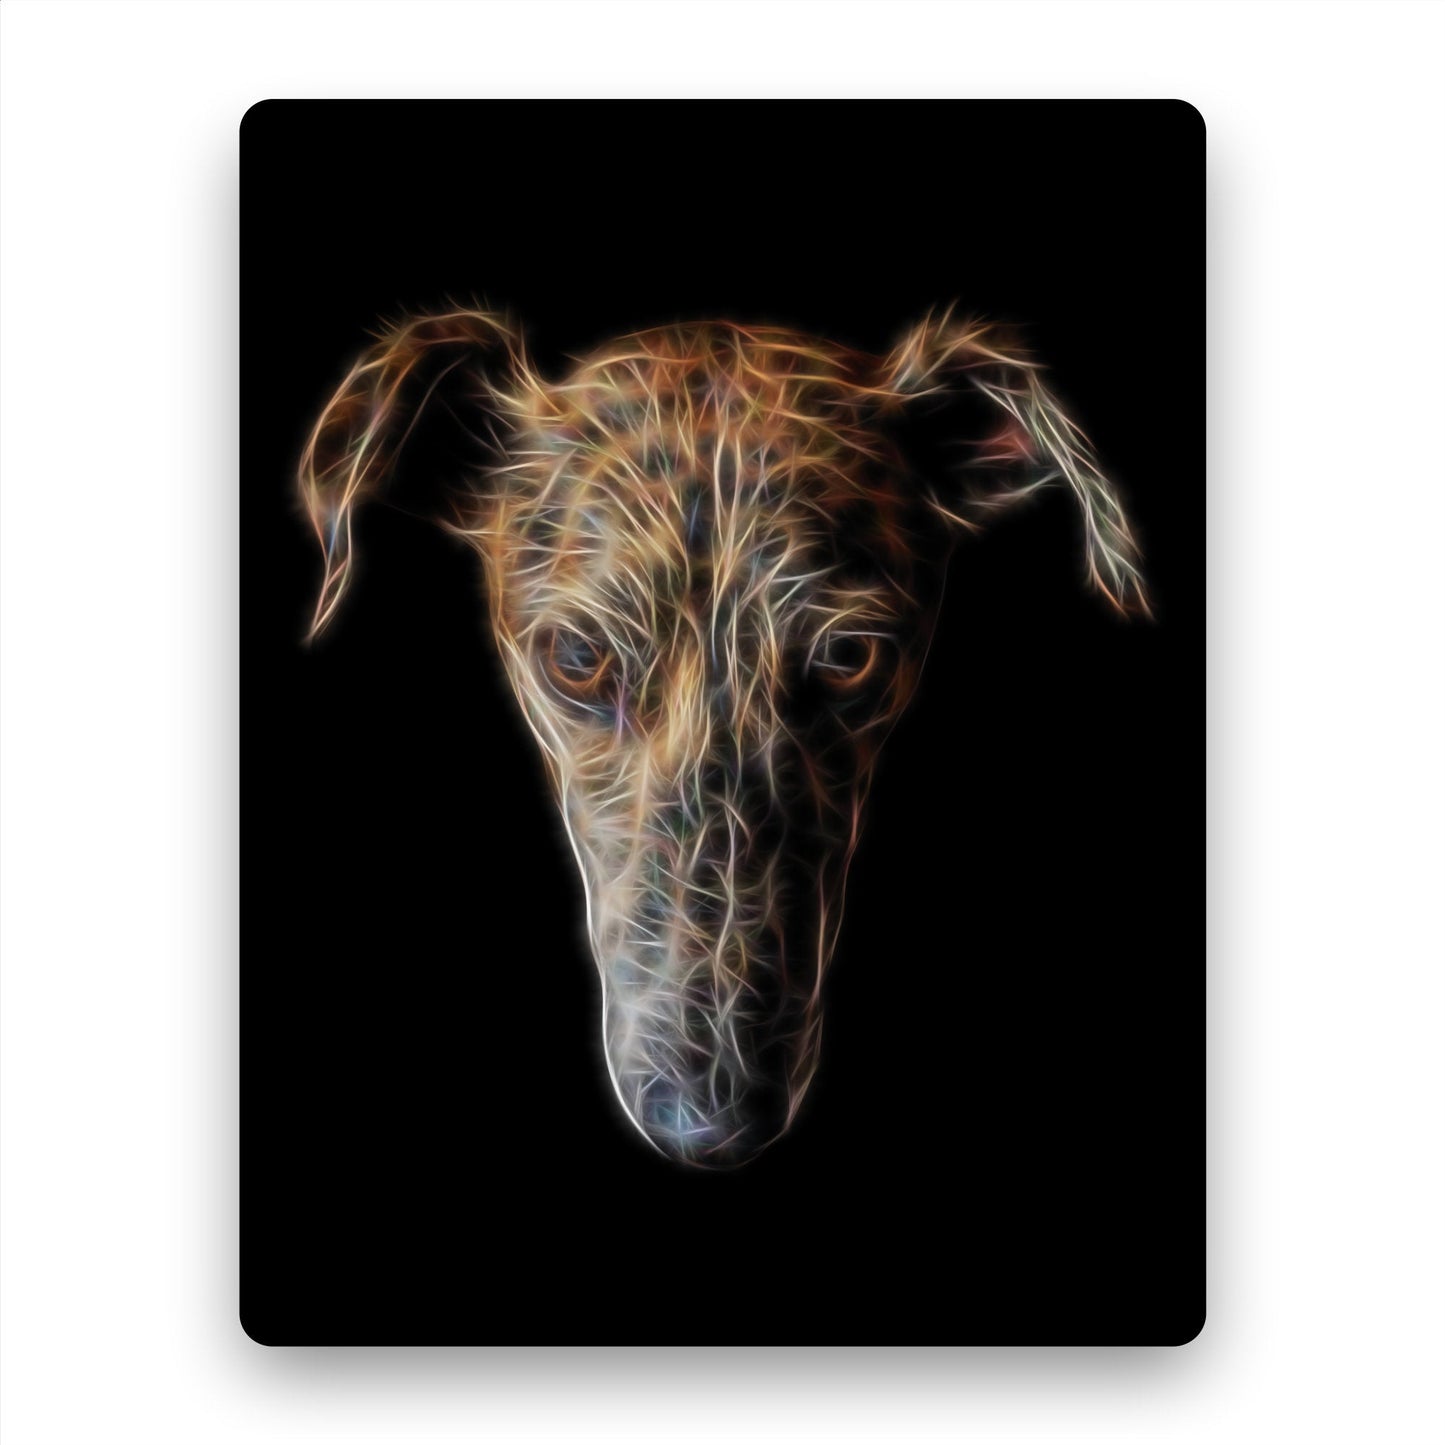 Brindle Lurcher Aluminium Metal Wall Plaque with Fractal Art Design, Gift for Brindle Lurcher Owner